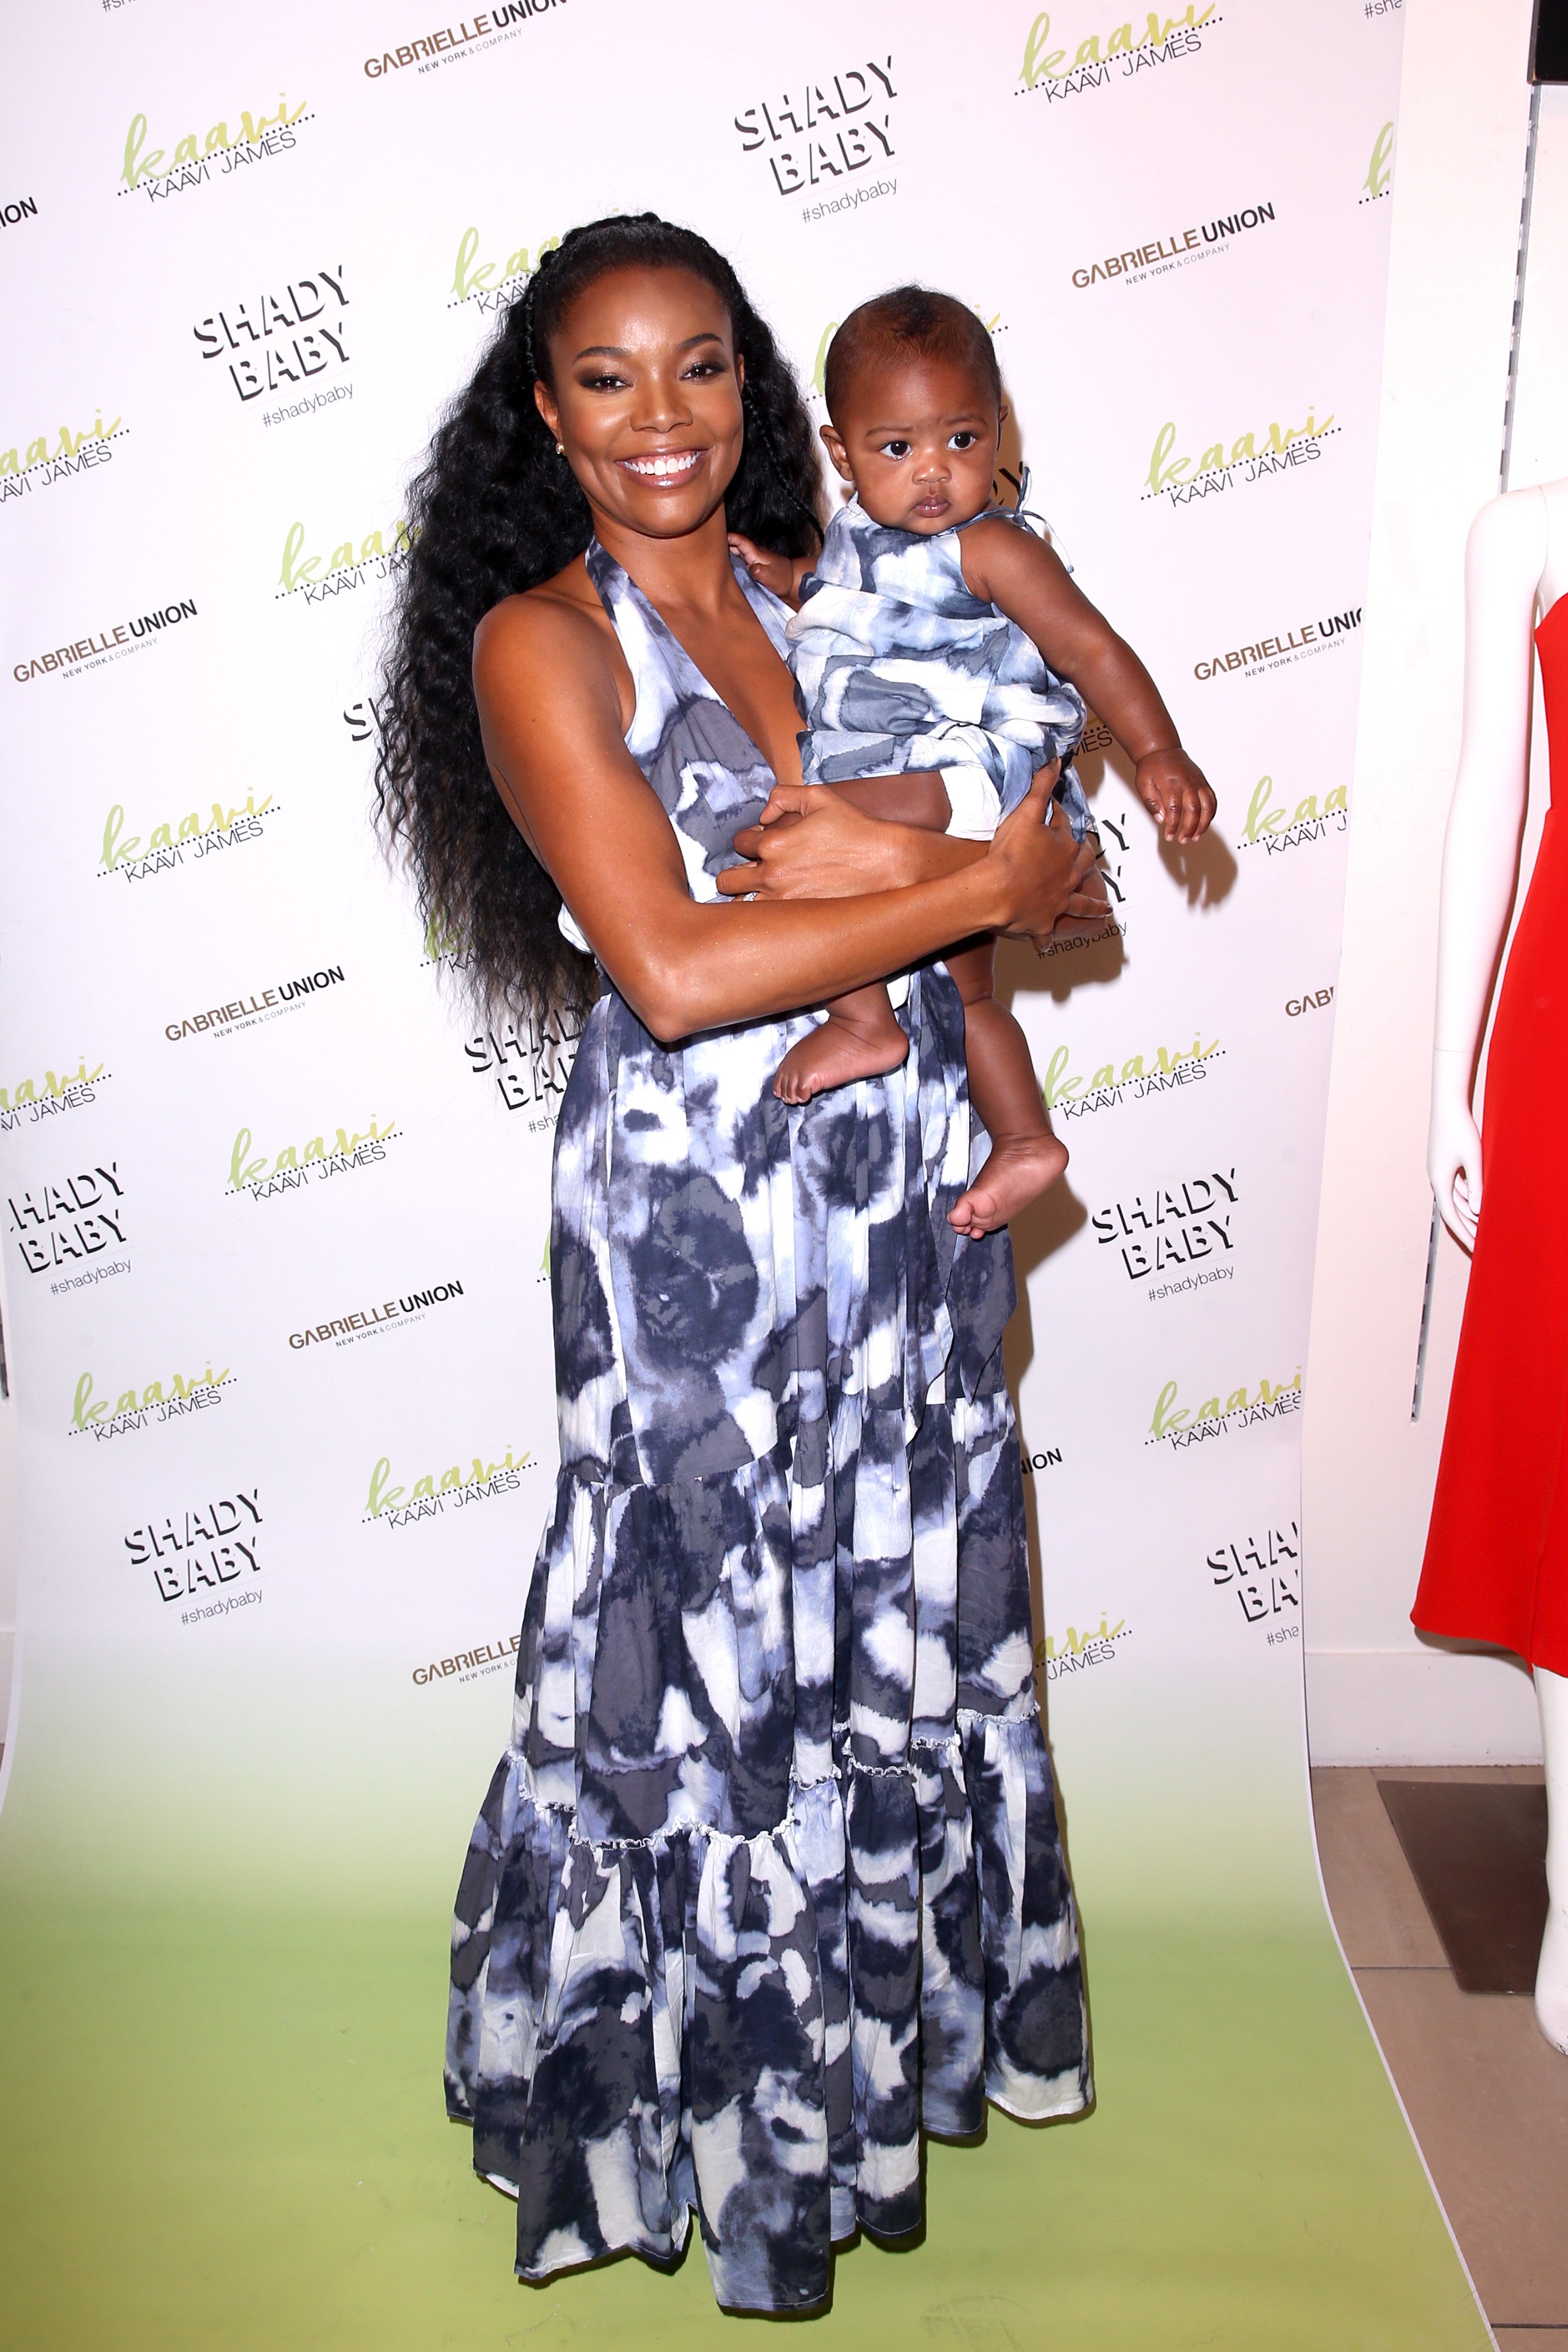 Gabrielle Union and her daughter Kaavia James Union Wade at the New York & Company Store in Burbank, CA, 2019 | Source: Getty Images